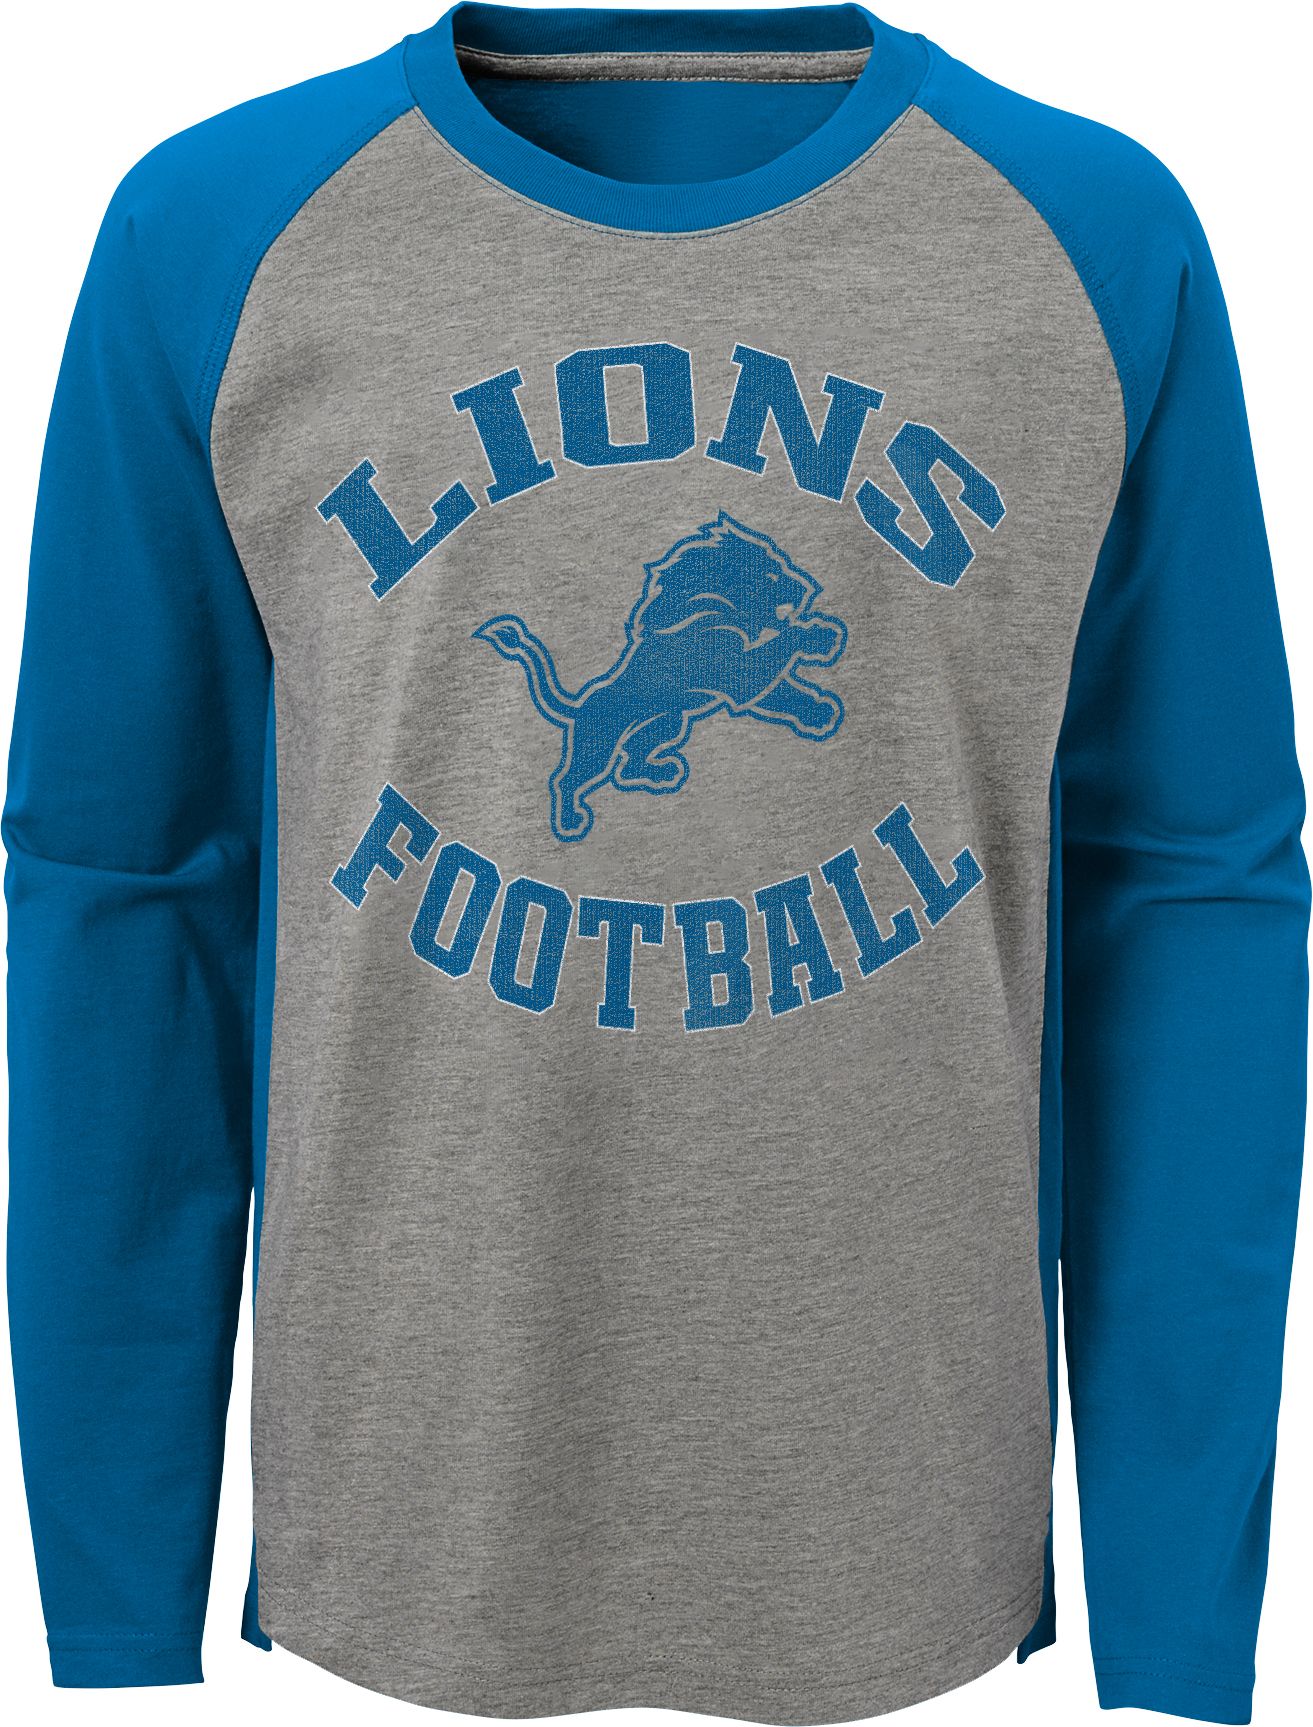 detroit lions youth apparel